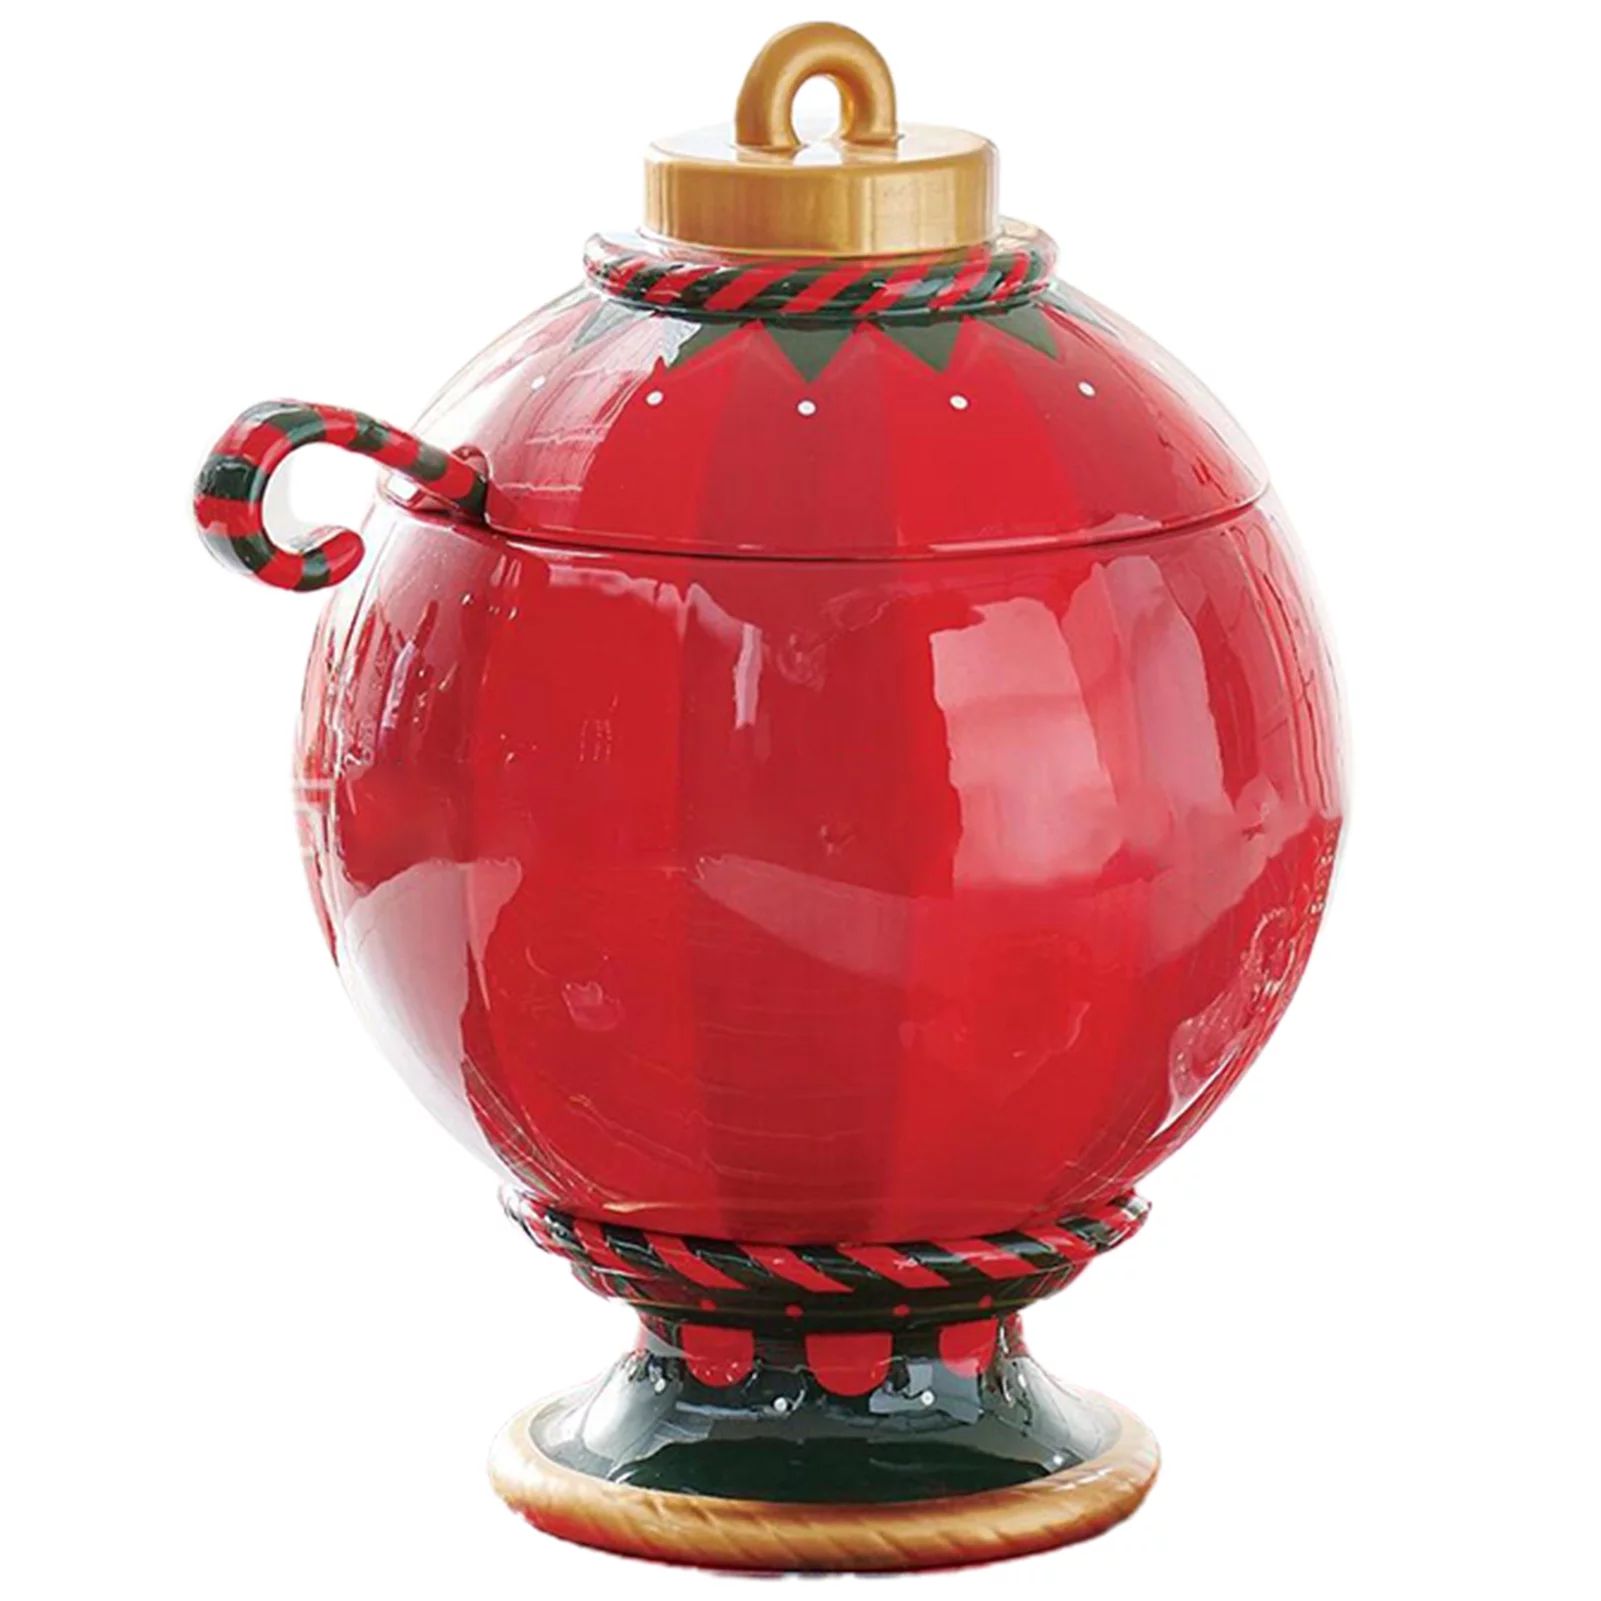 New Oversized Punch Bowl for Christmas Party Vintage Ornament Decorative Resin Serving Bowl | Walmart (US)